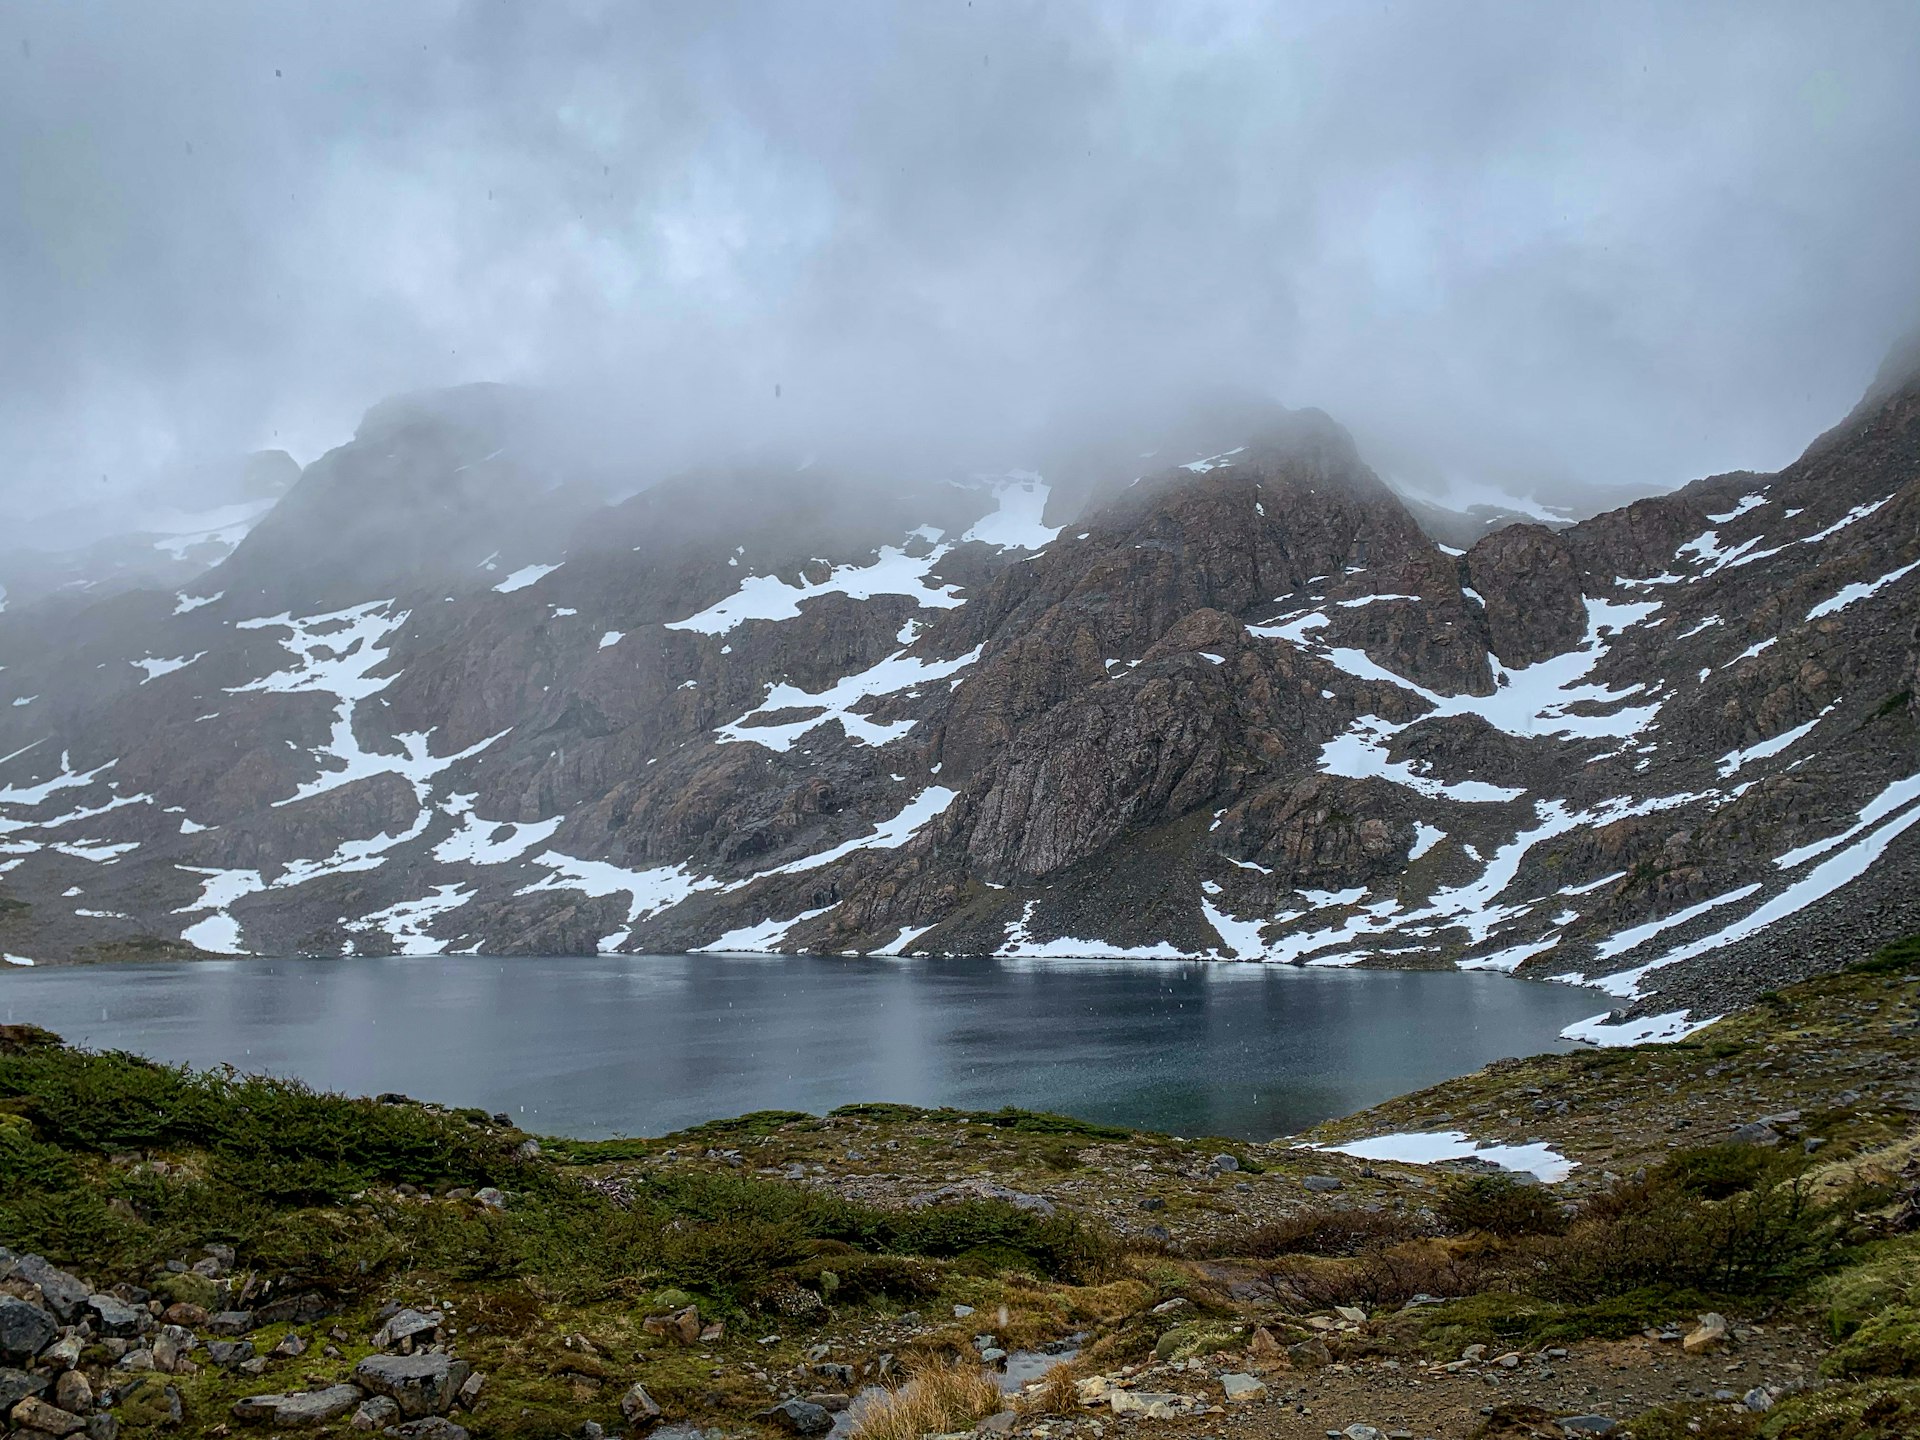 Mist lingers over the top of a snow-dotted peak behind Laguna Escondida.